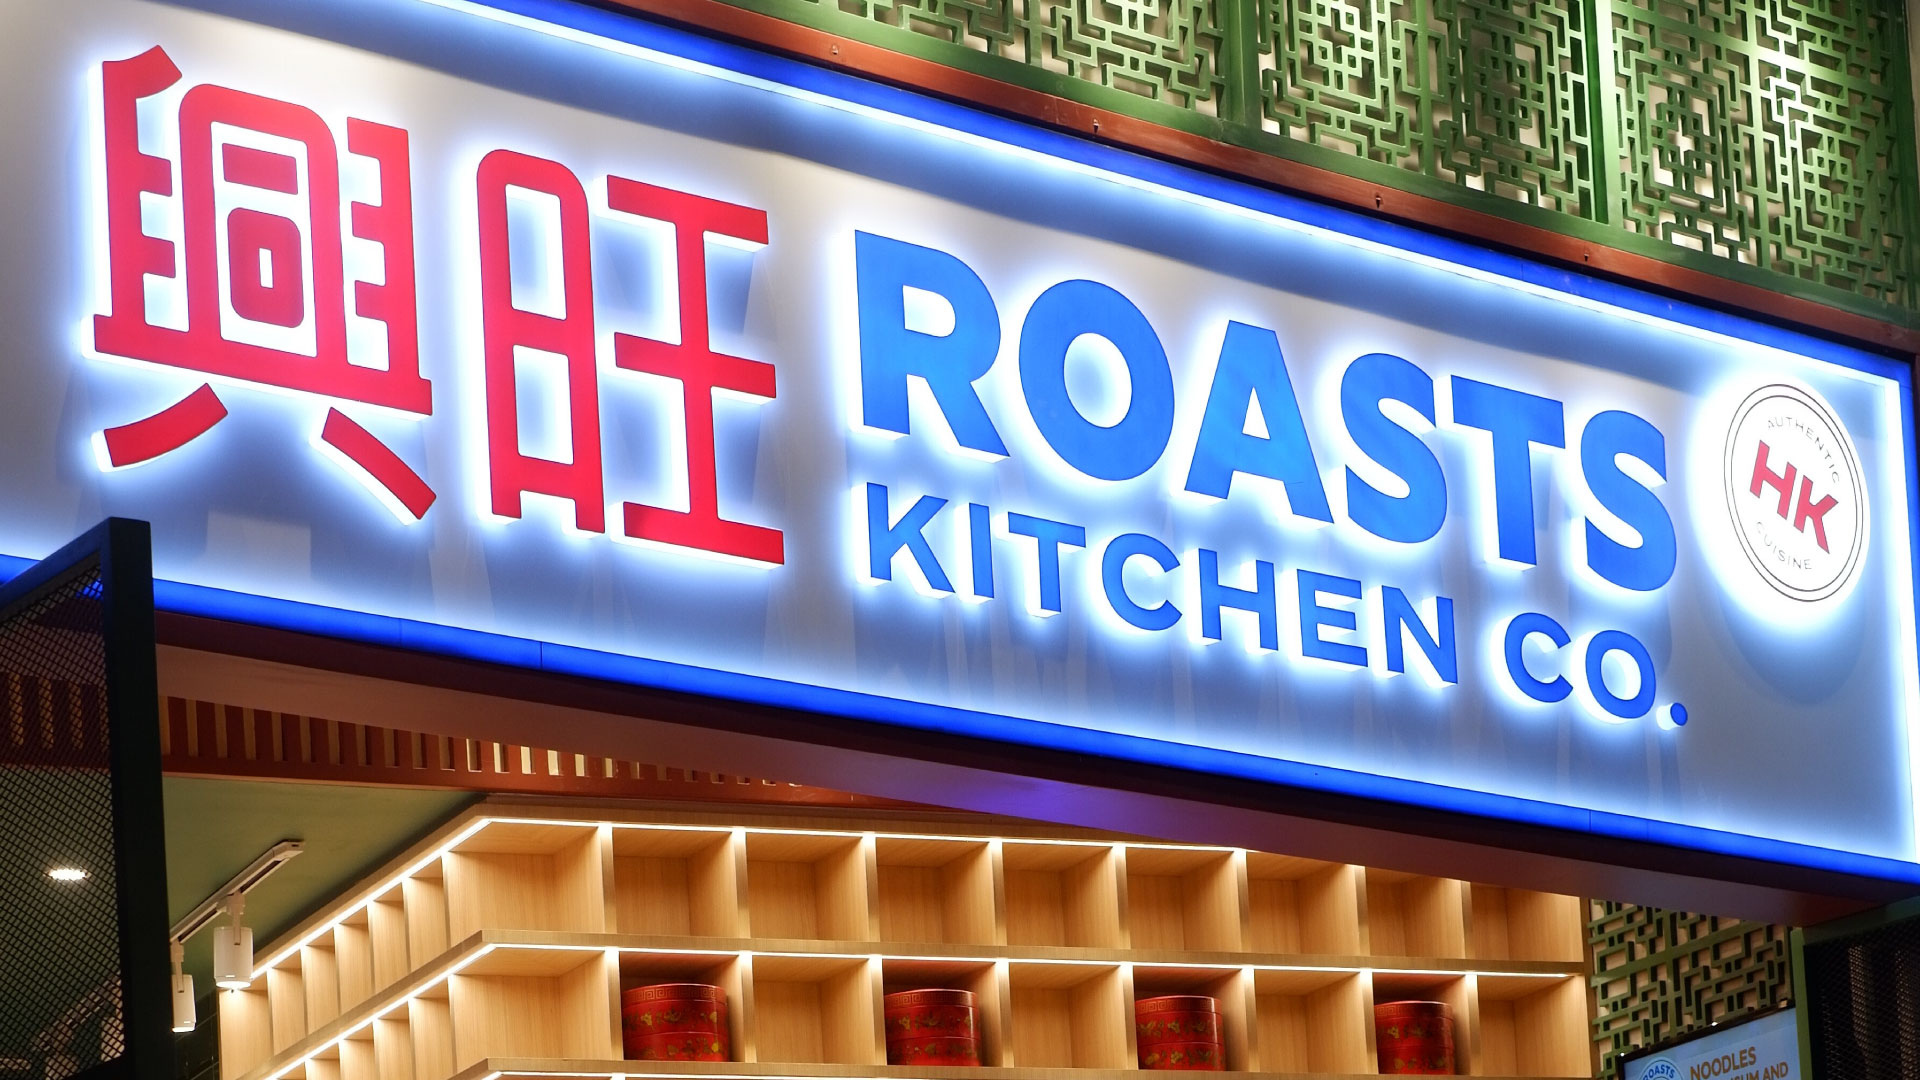 Neon lit up signage for Hong Kong roasts restaurant Roasts Kitchen Company